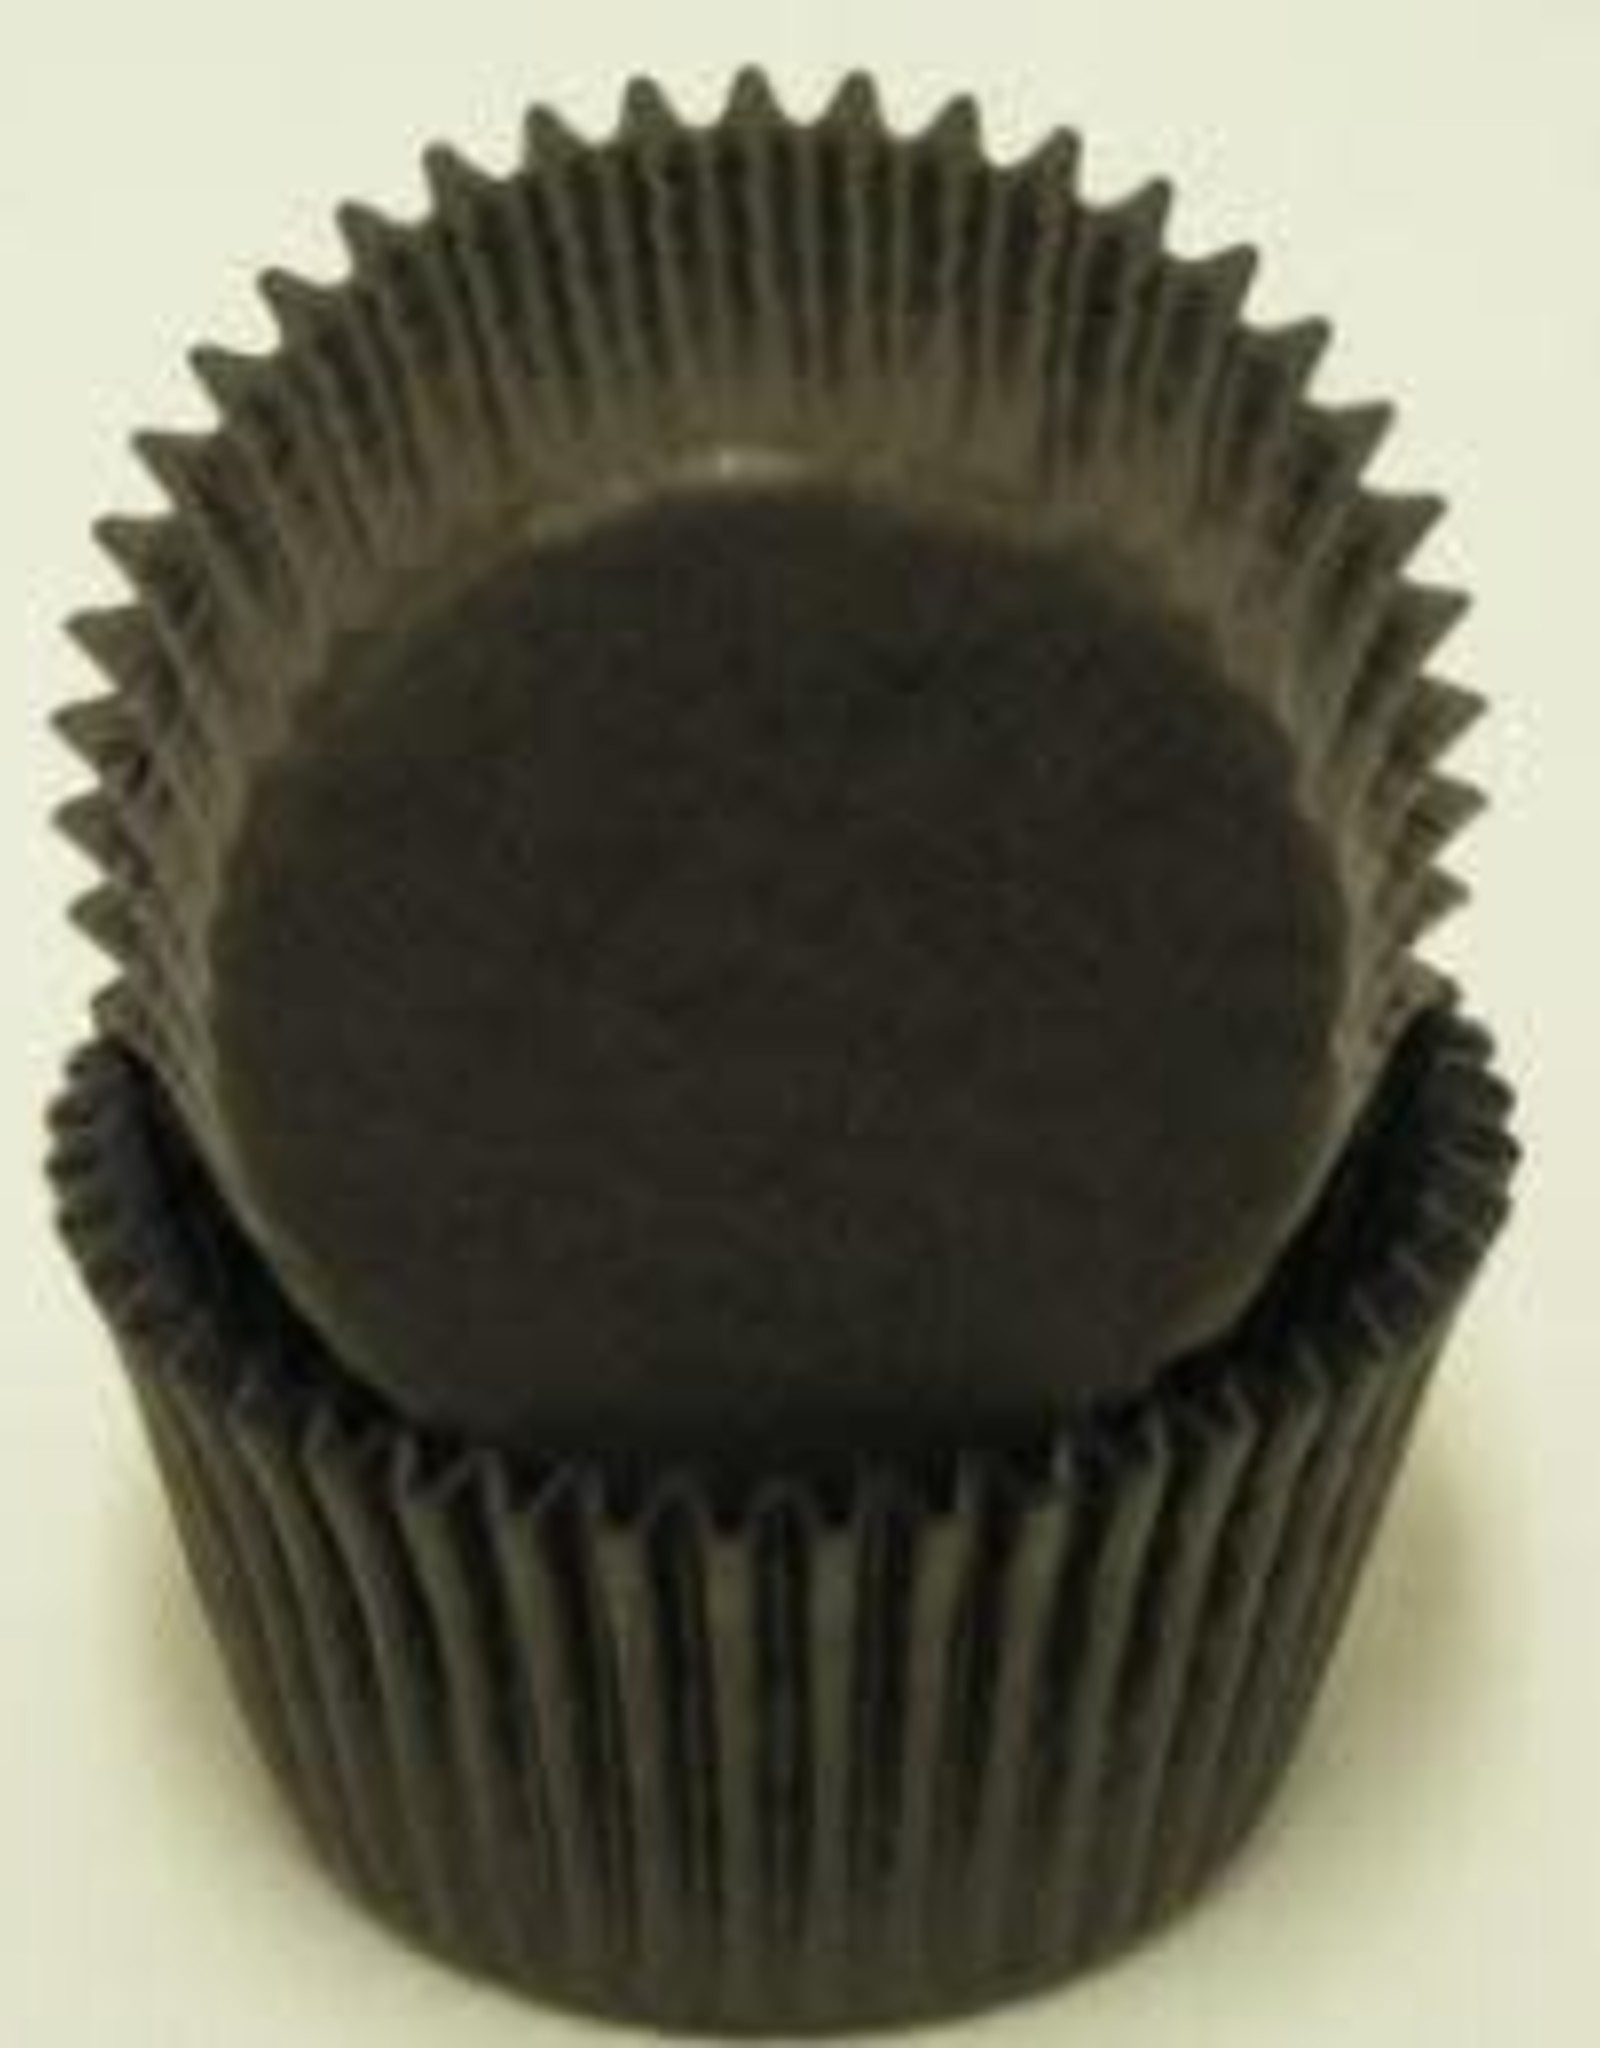 Black Baking Cups (30-40 ct)